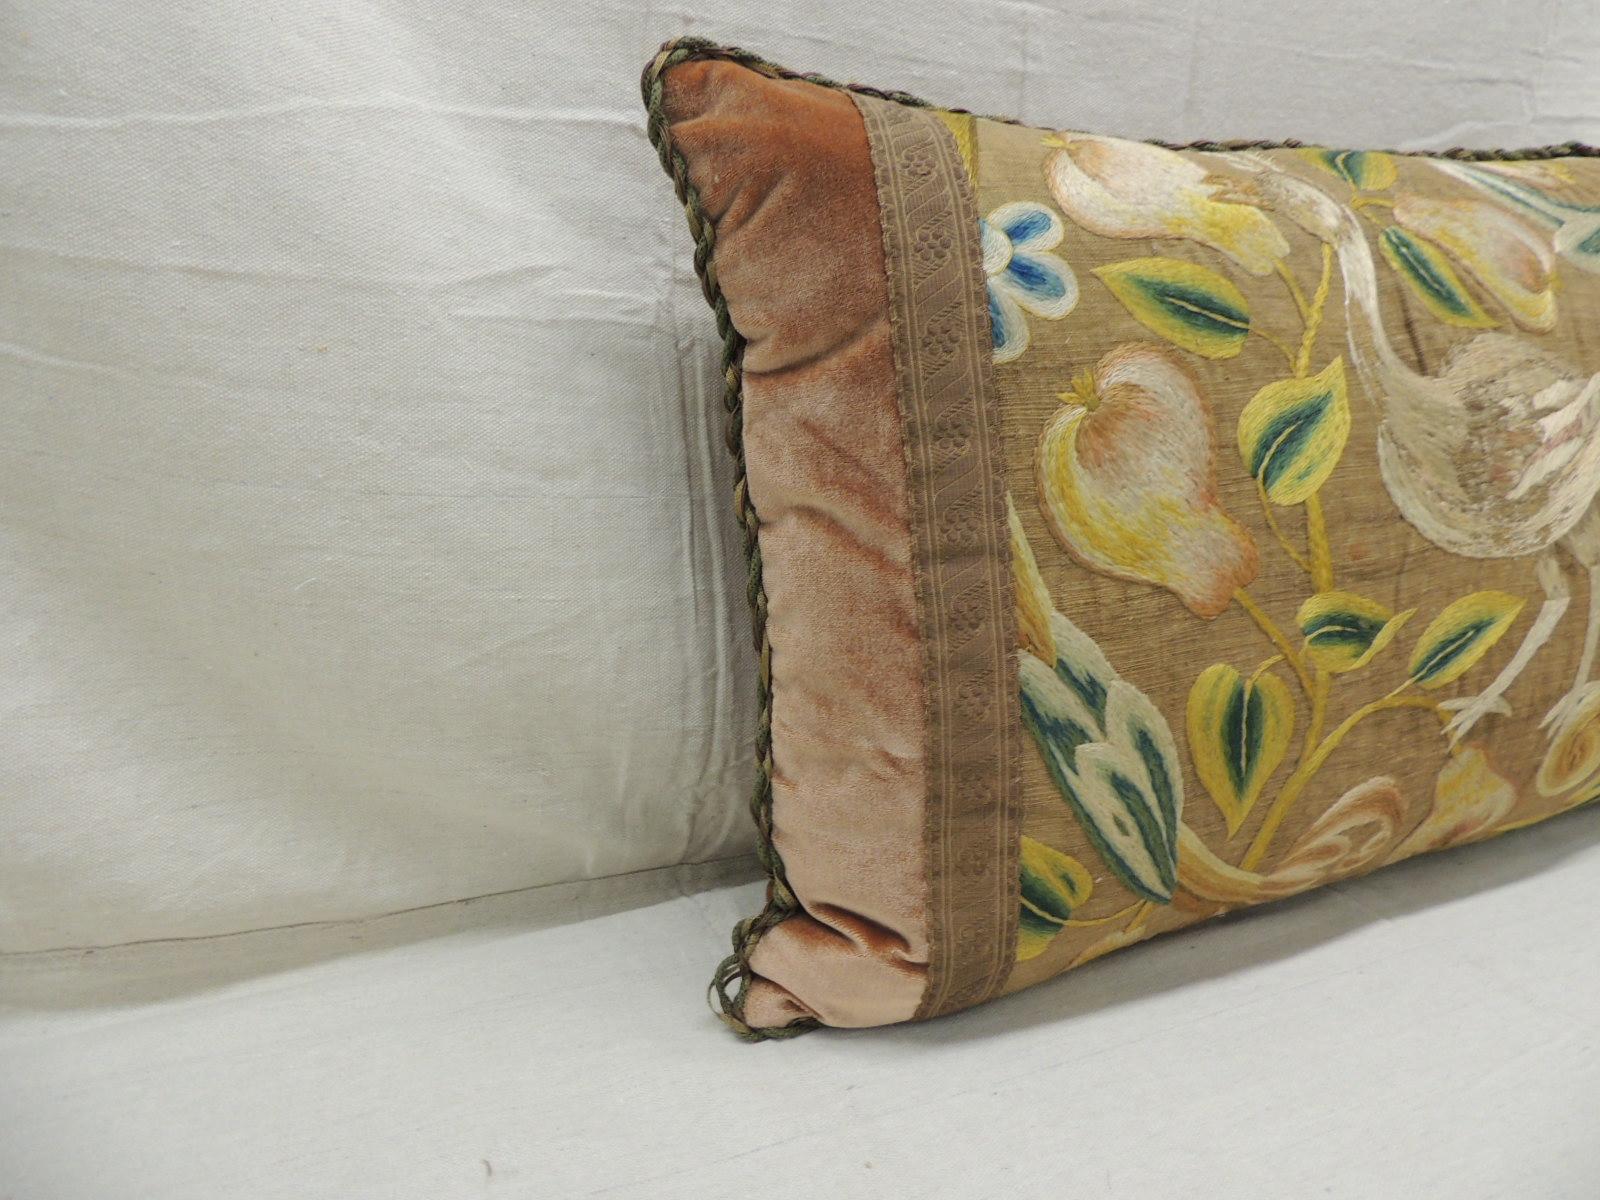 Antique Venetian floral embroidered large bolster decorative pillow.
Italian floral silk floss thread embroidered on linen depicting large bird and fruits.
In shades of yellow, green, white, pink and blue.
Darkish copper color silk velvet backing